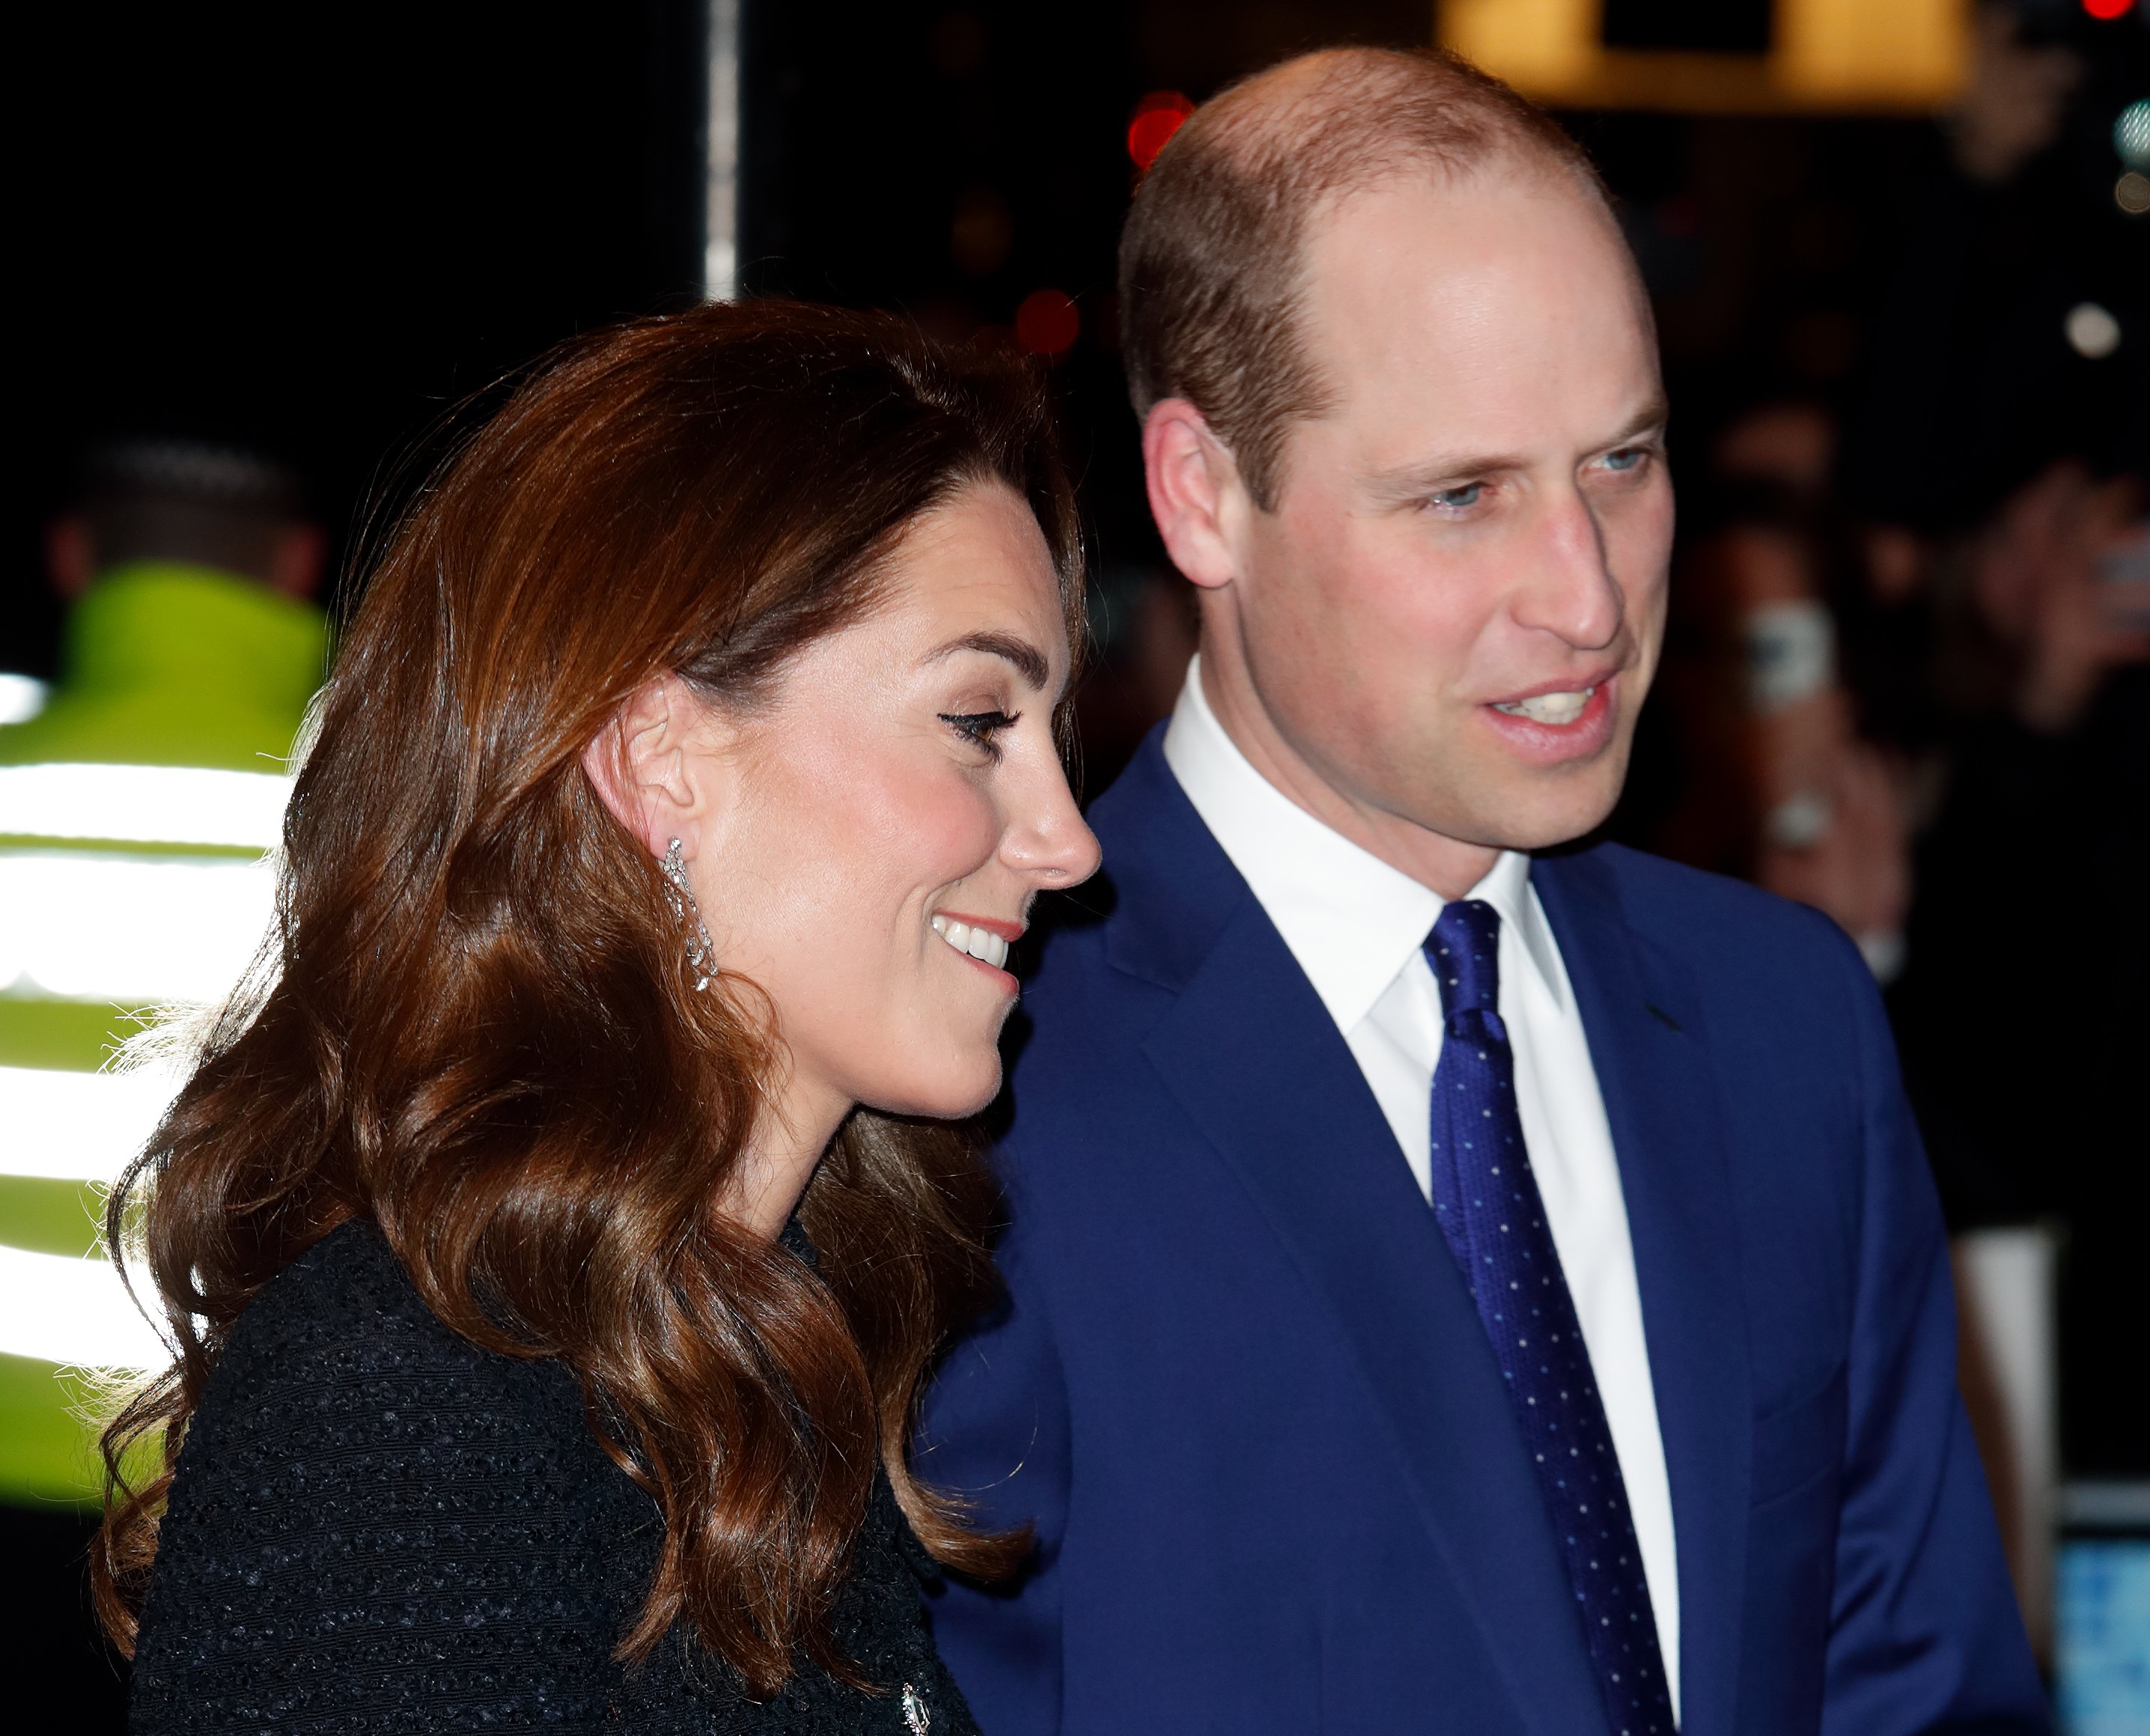 Catherine, Duchess of Cambridge and Prince William, Duke of Cambridge attend a charity performance of "Dear Evan Hansen" in aid of The Royal Foundation at the Noel Coward Theatre on February 25, 2020 in London, England. | Source: Getty Images